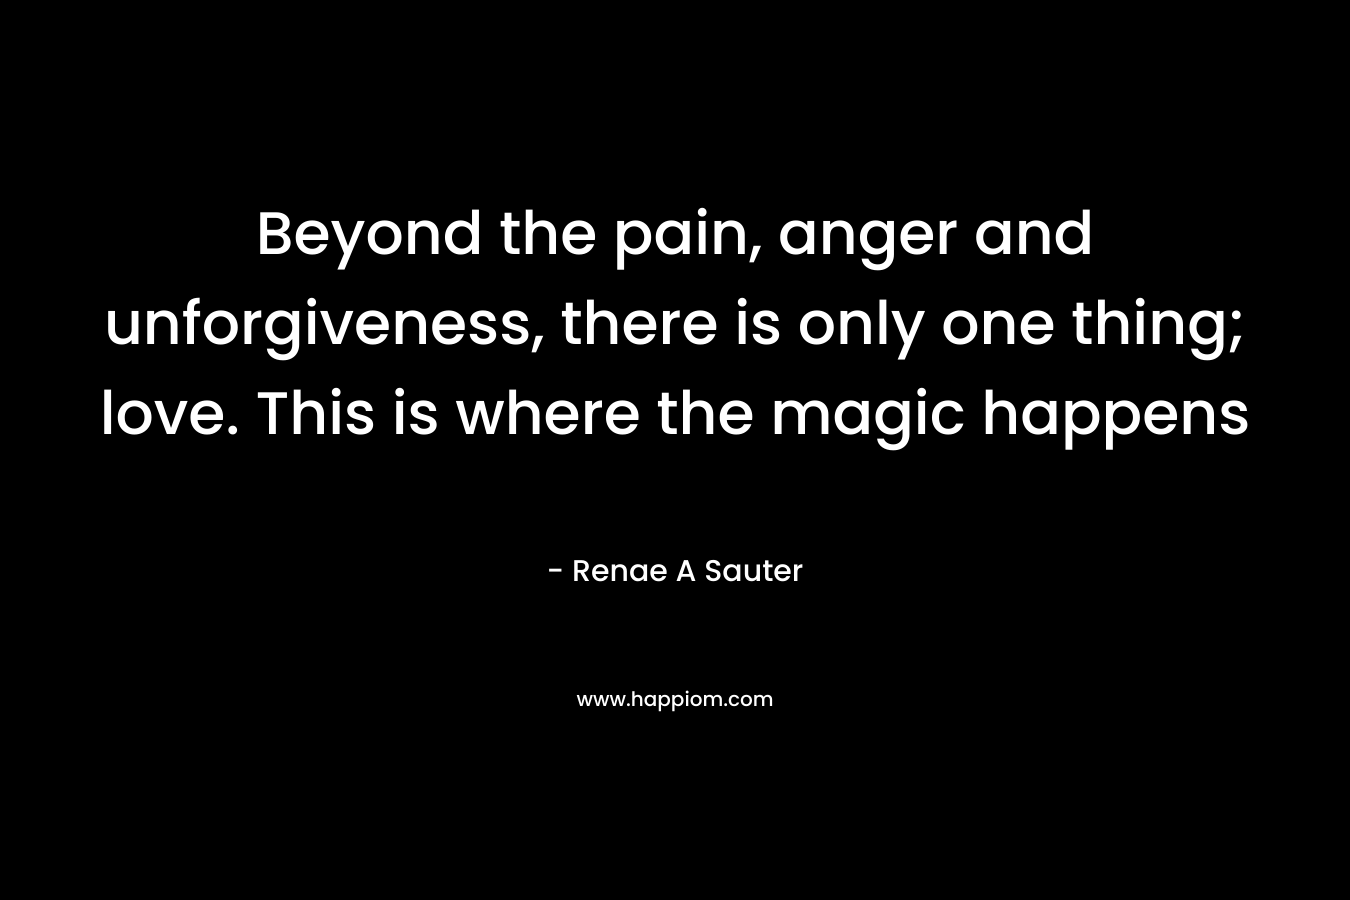 Beyond the pain, anger and unforgiveness, there is only one thing; love. This is where the magic happens